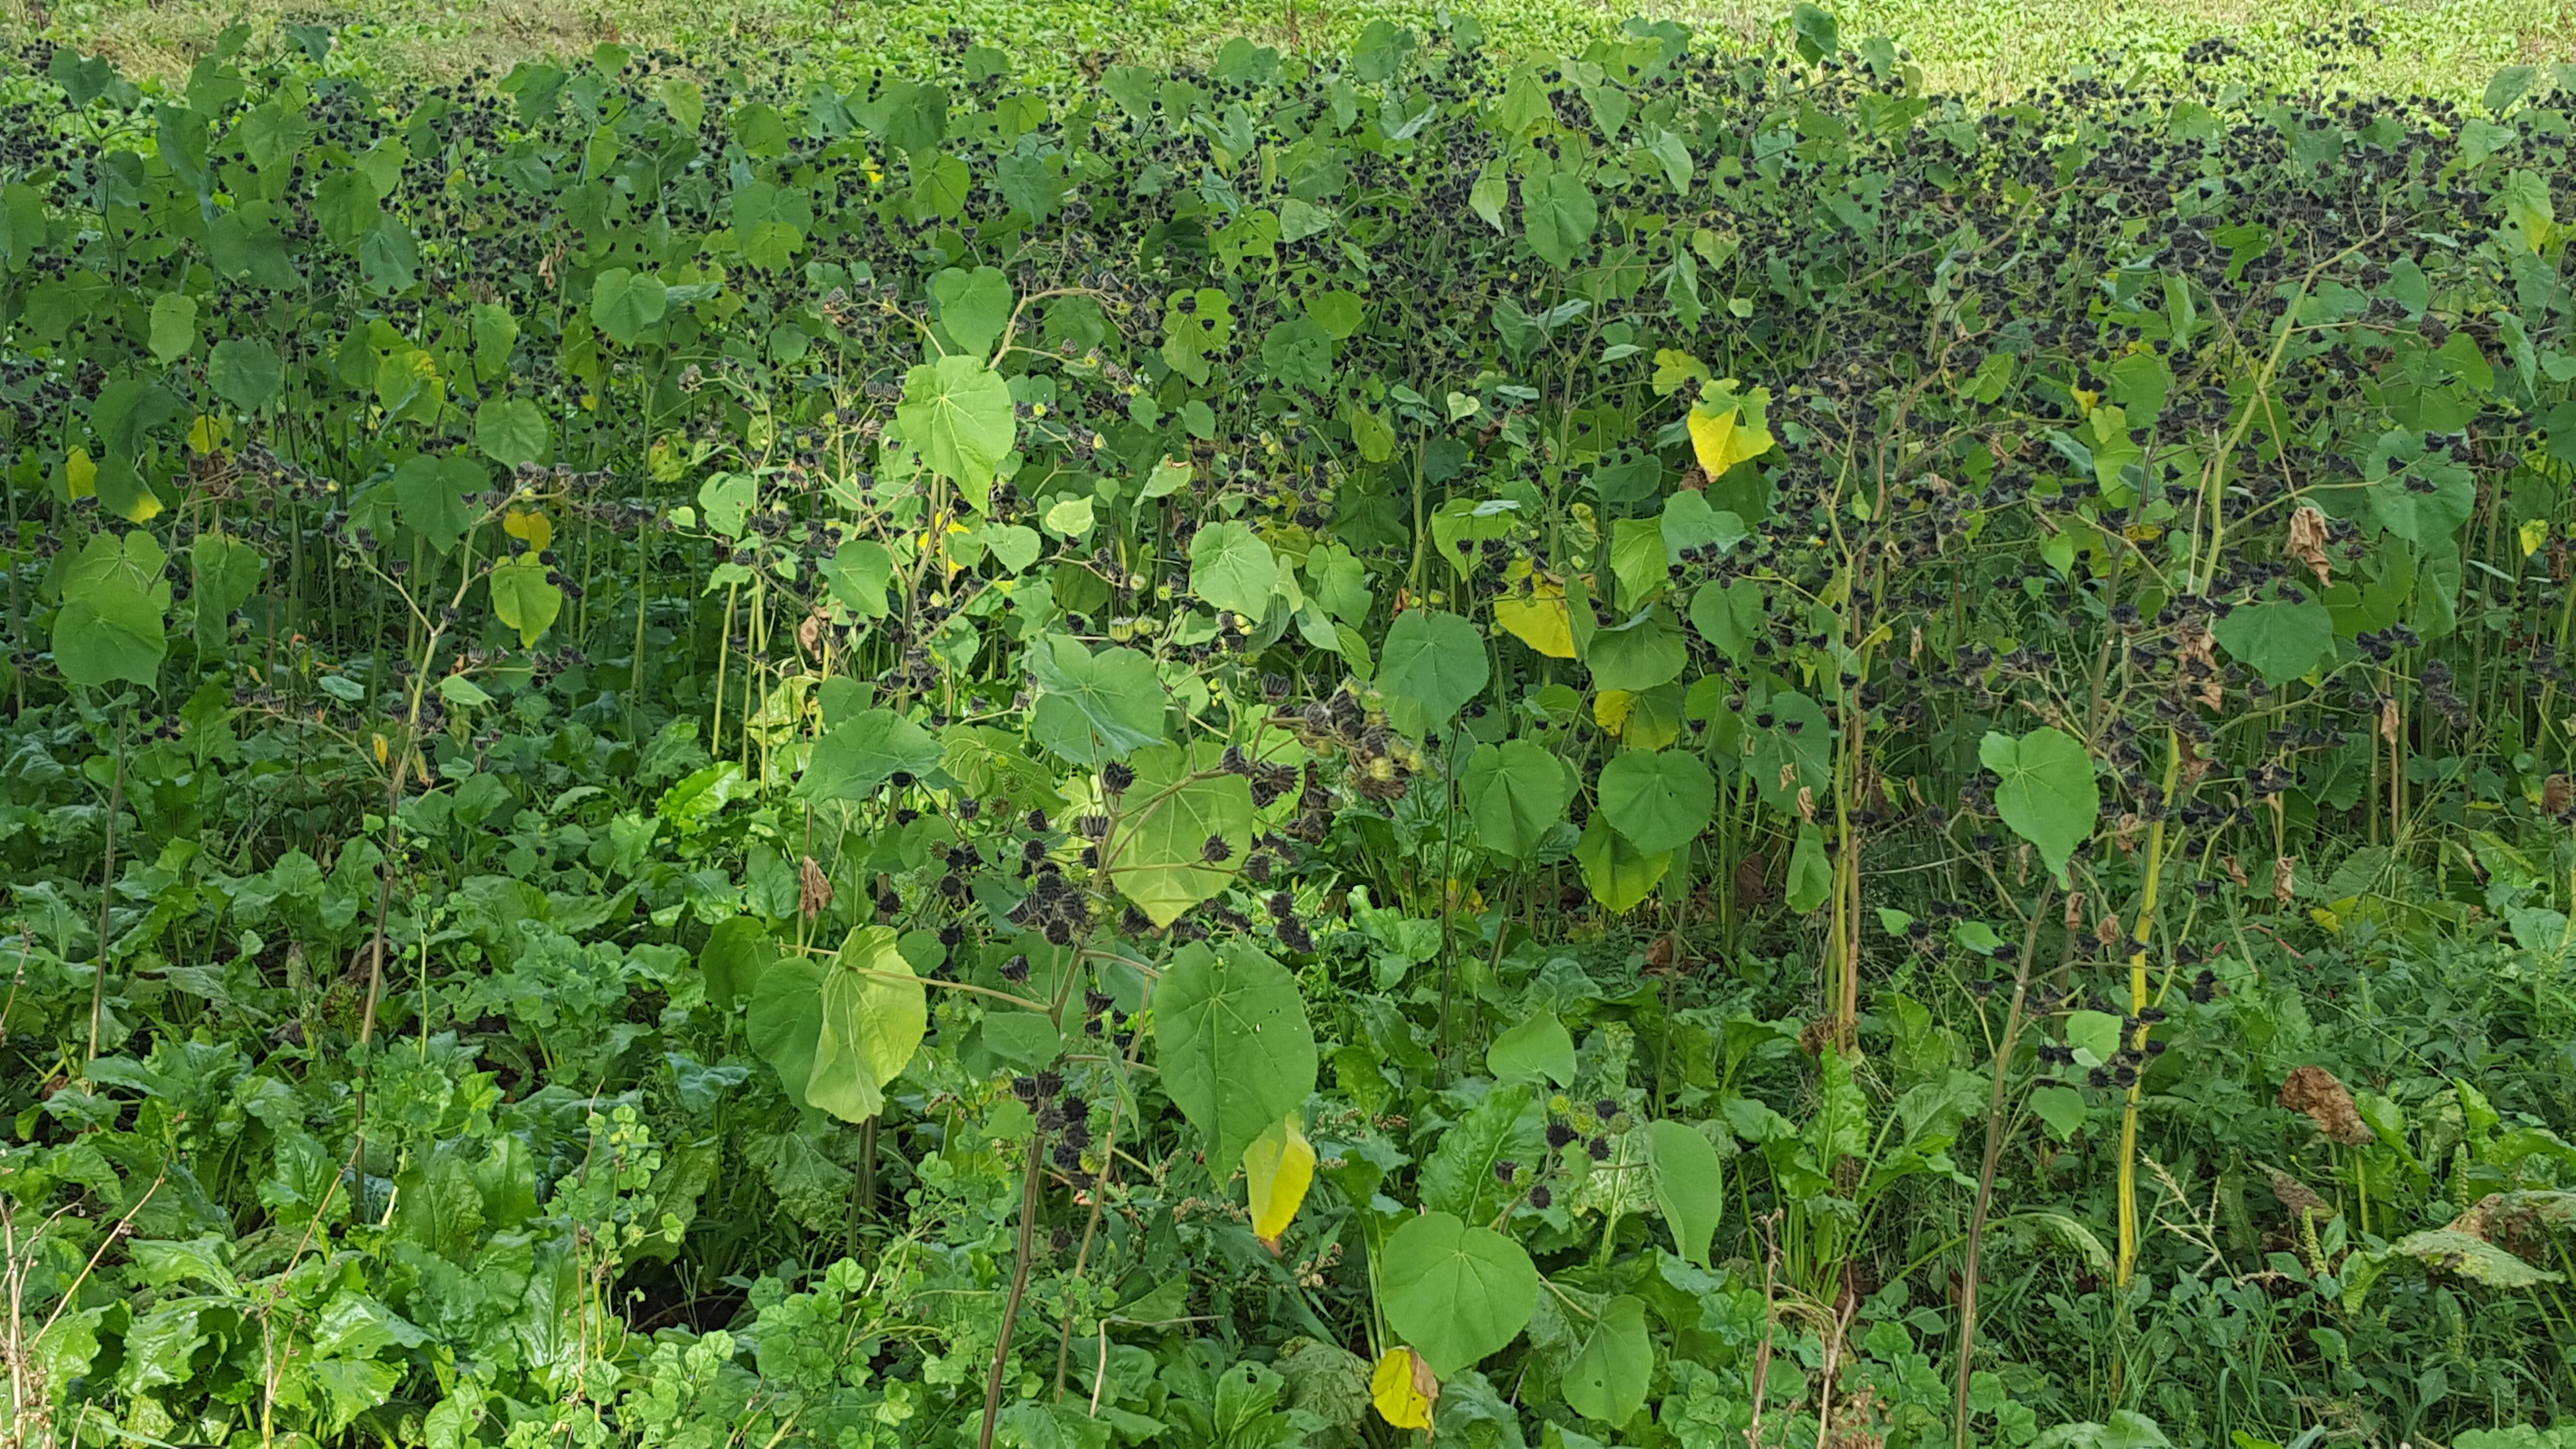 Patch of land overgrown with a lot of velvetleaf plants, showing 3 years of growth.